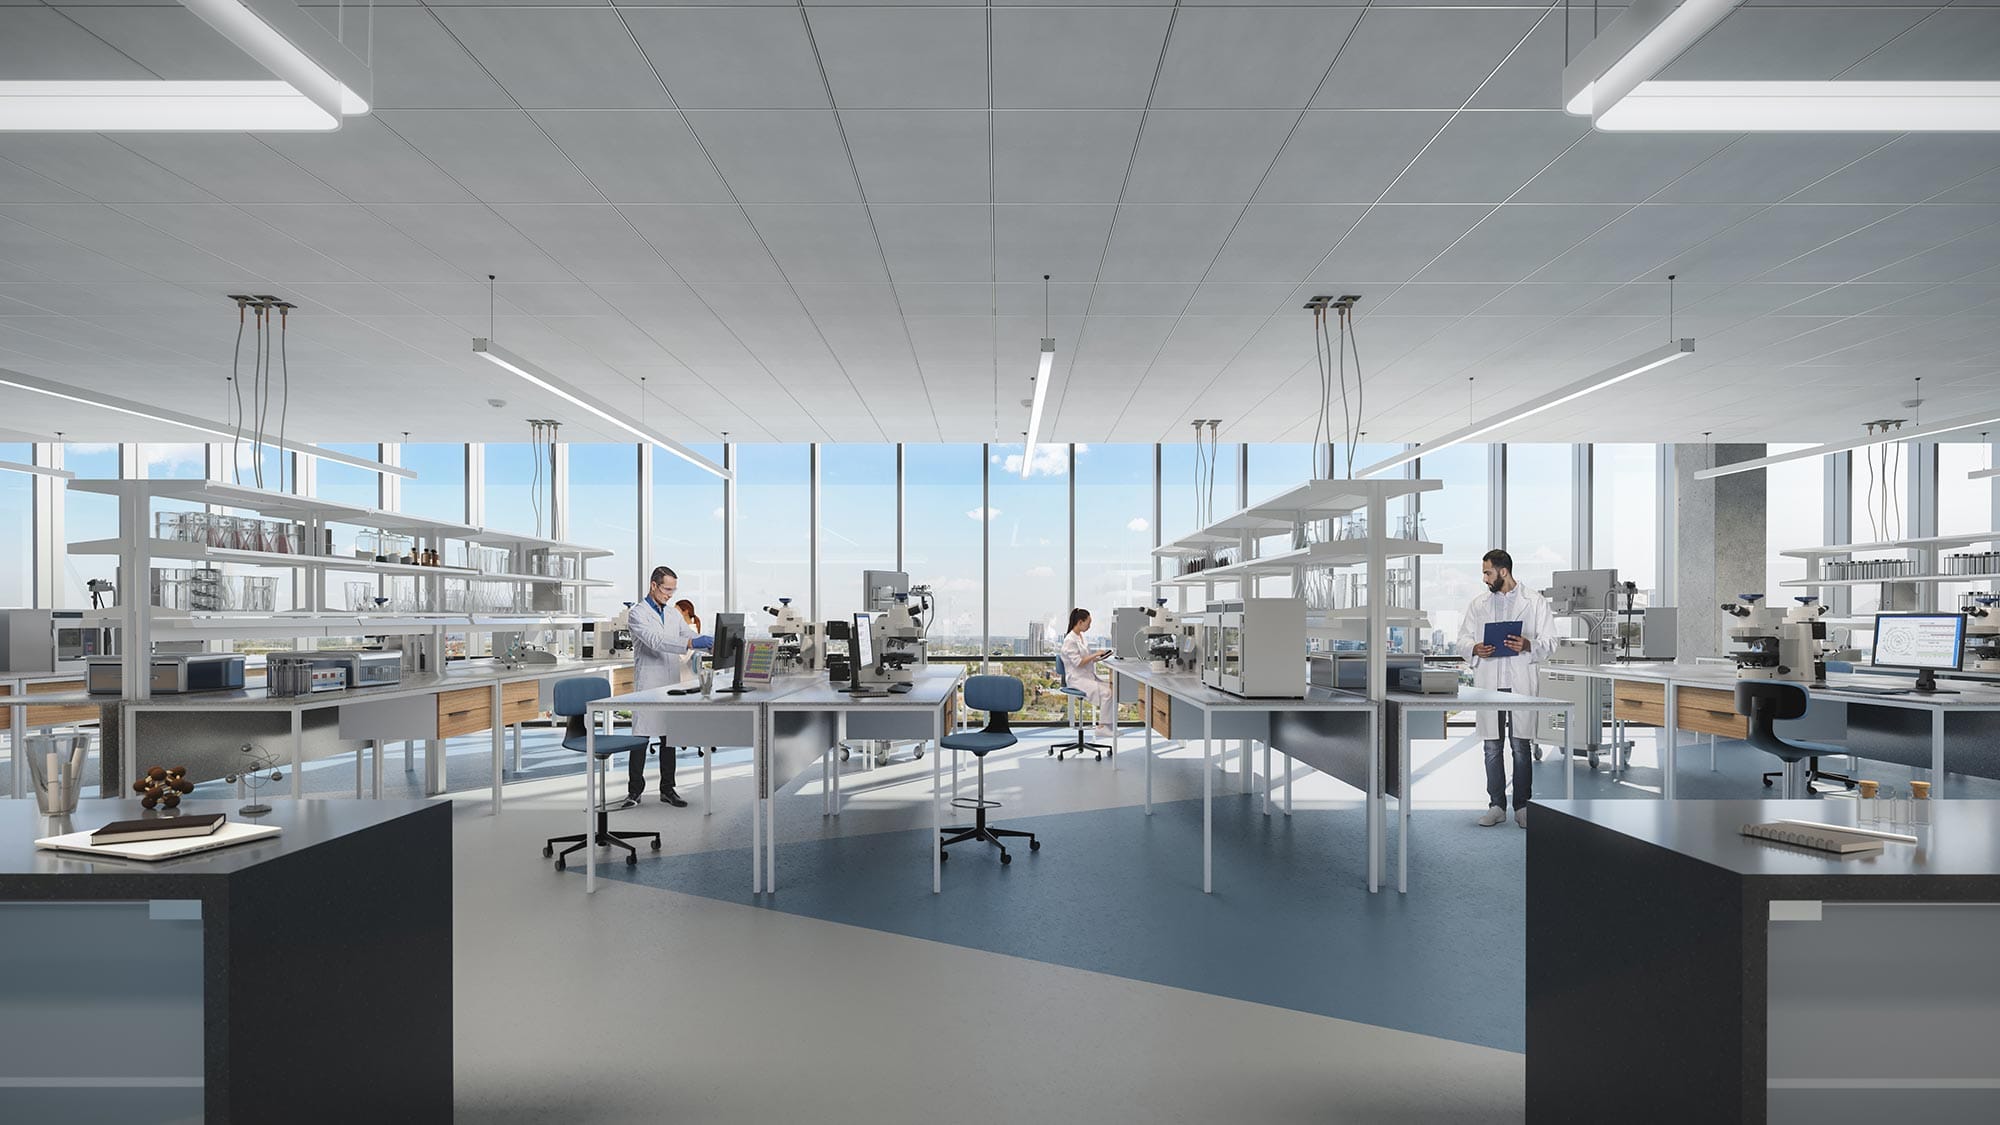 Scientists working in open concept lab space with city views